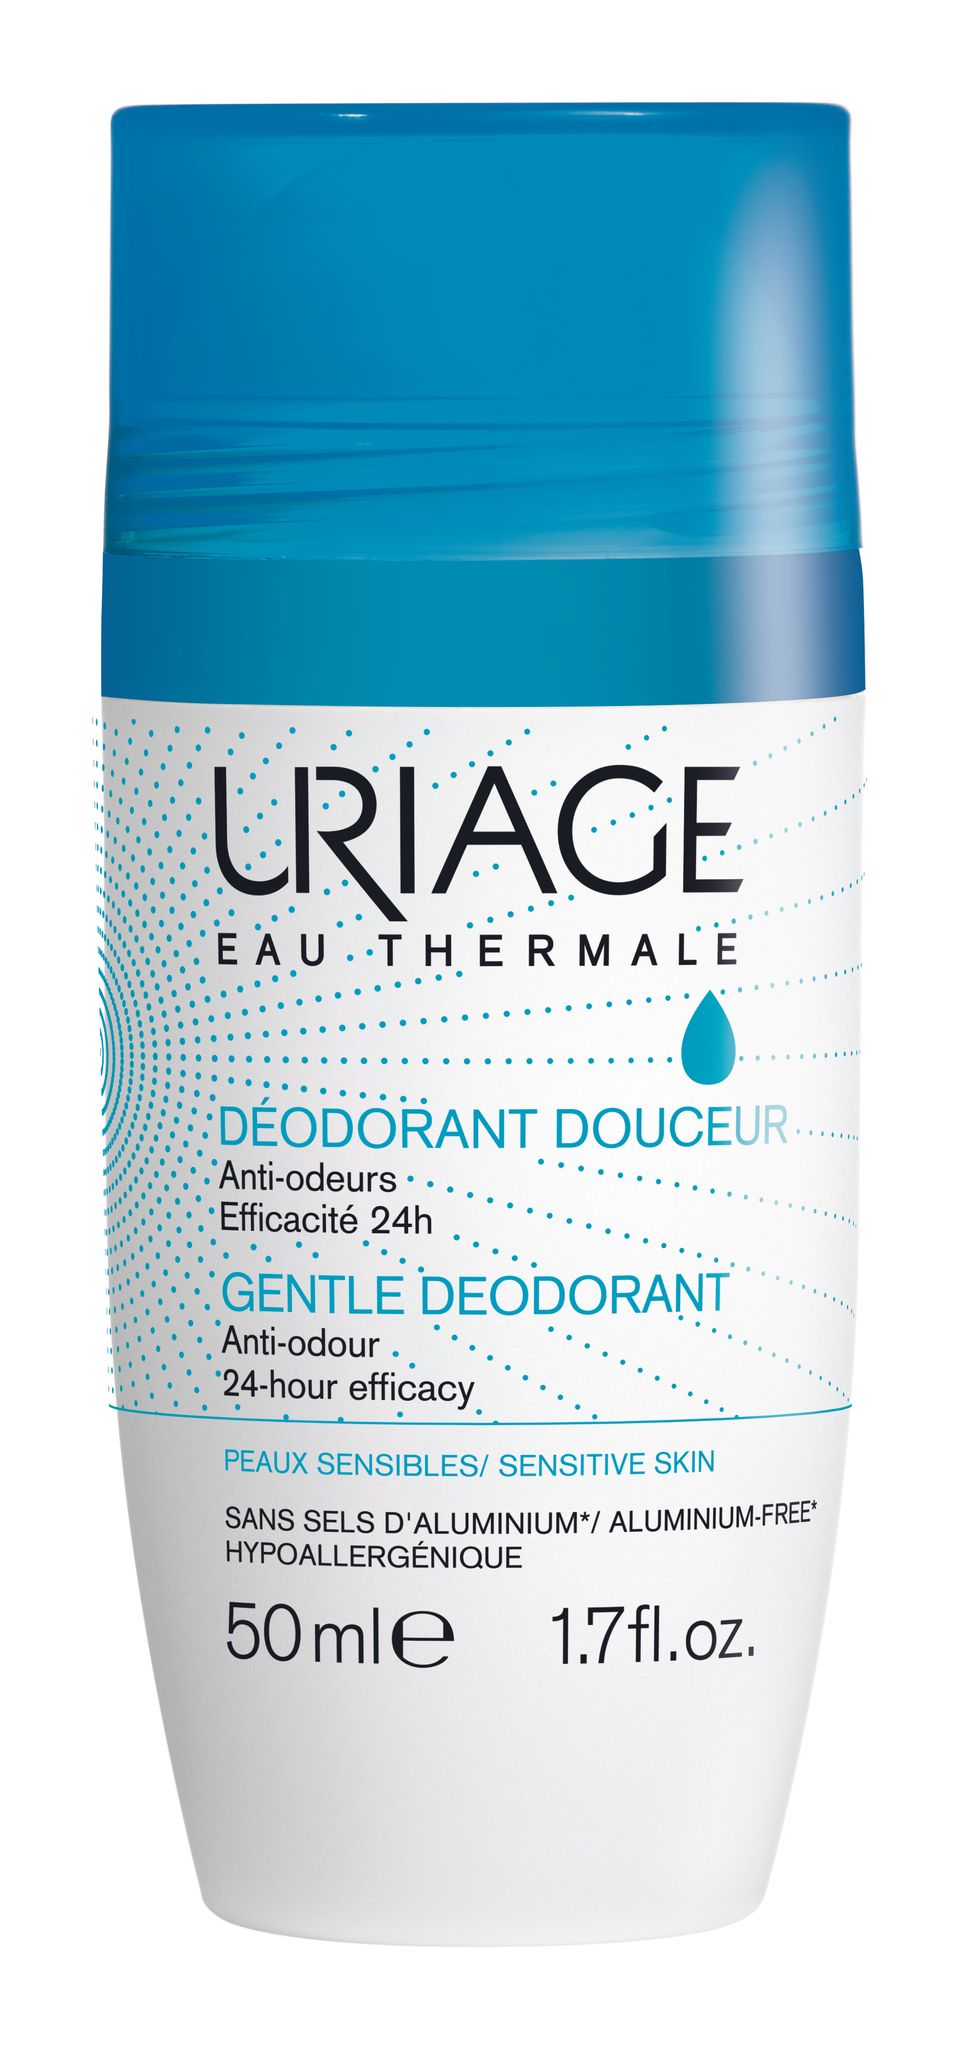 Deodorant Douceur Roll On for normal sweating